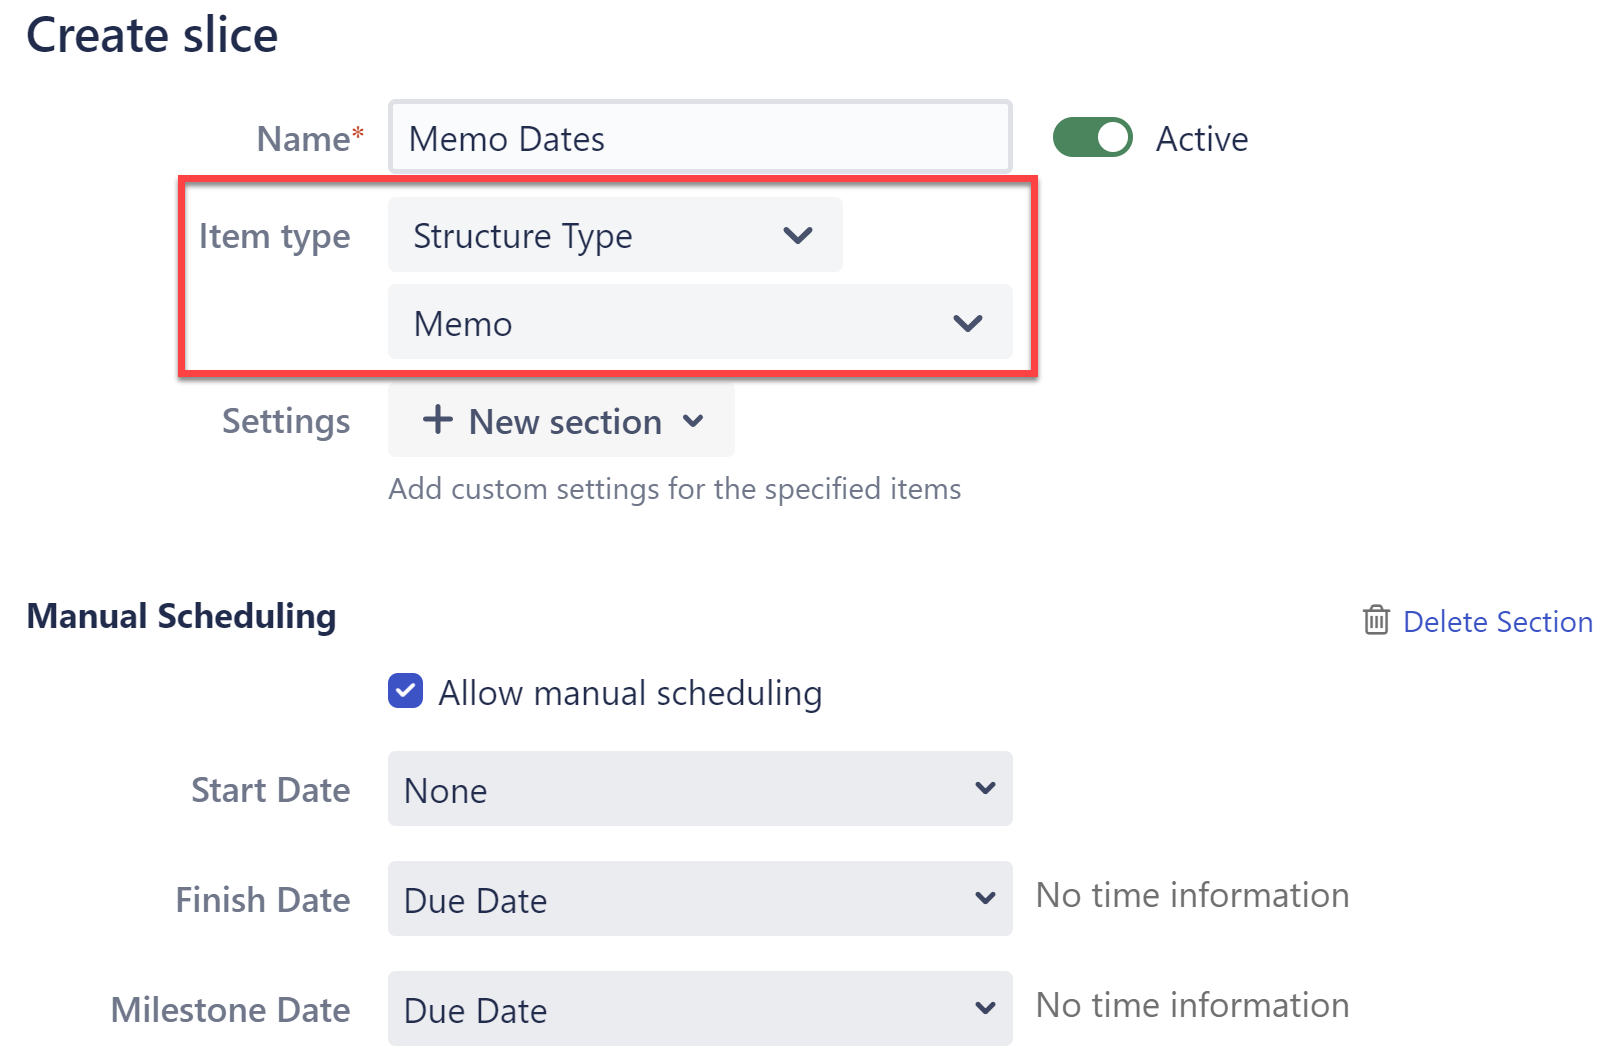 Gantt Slice configuration with Memo selected as the Item type